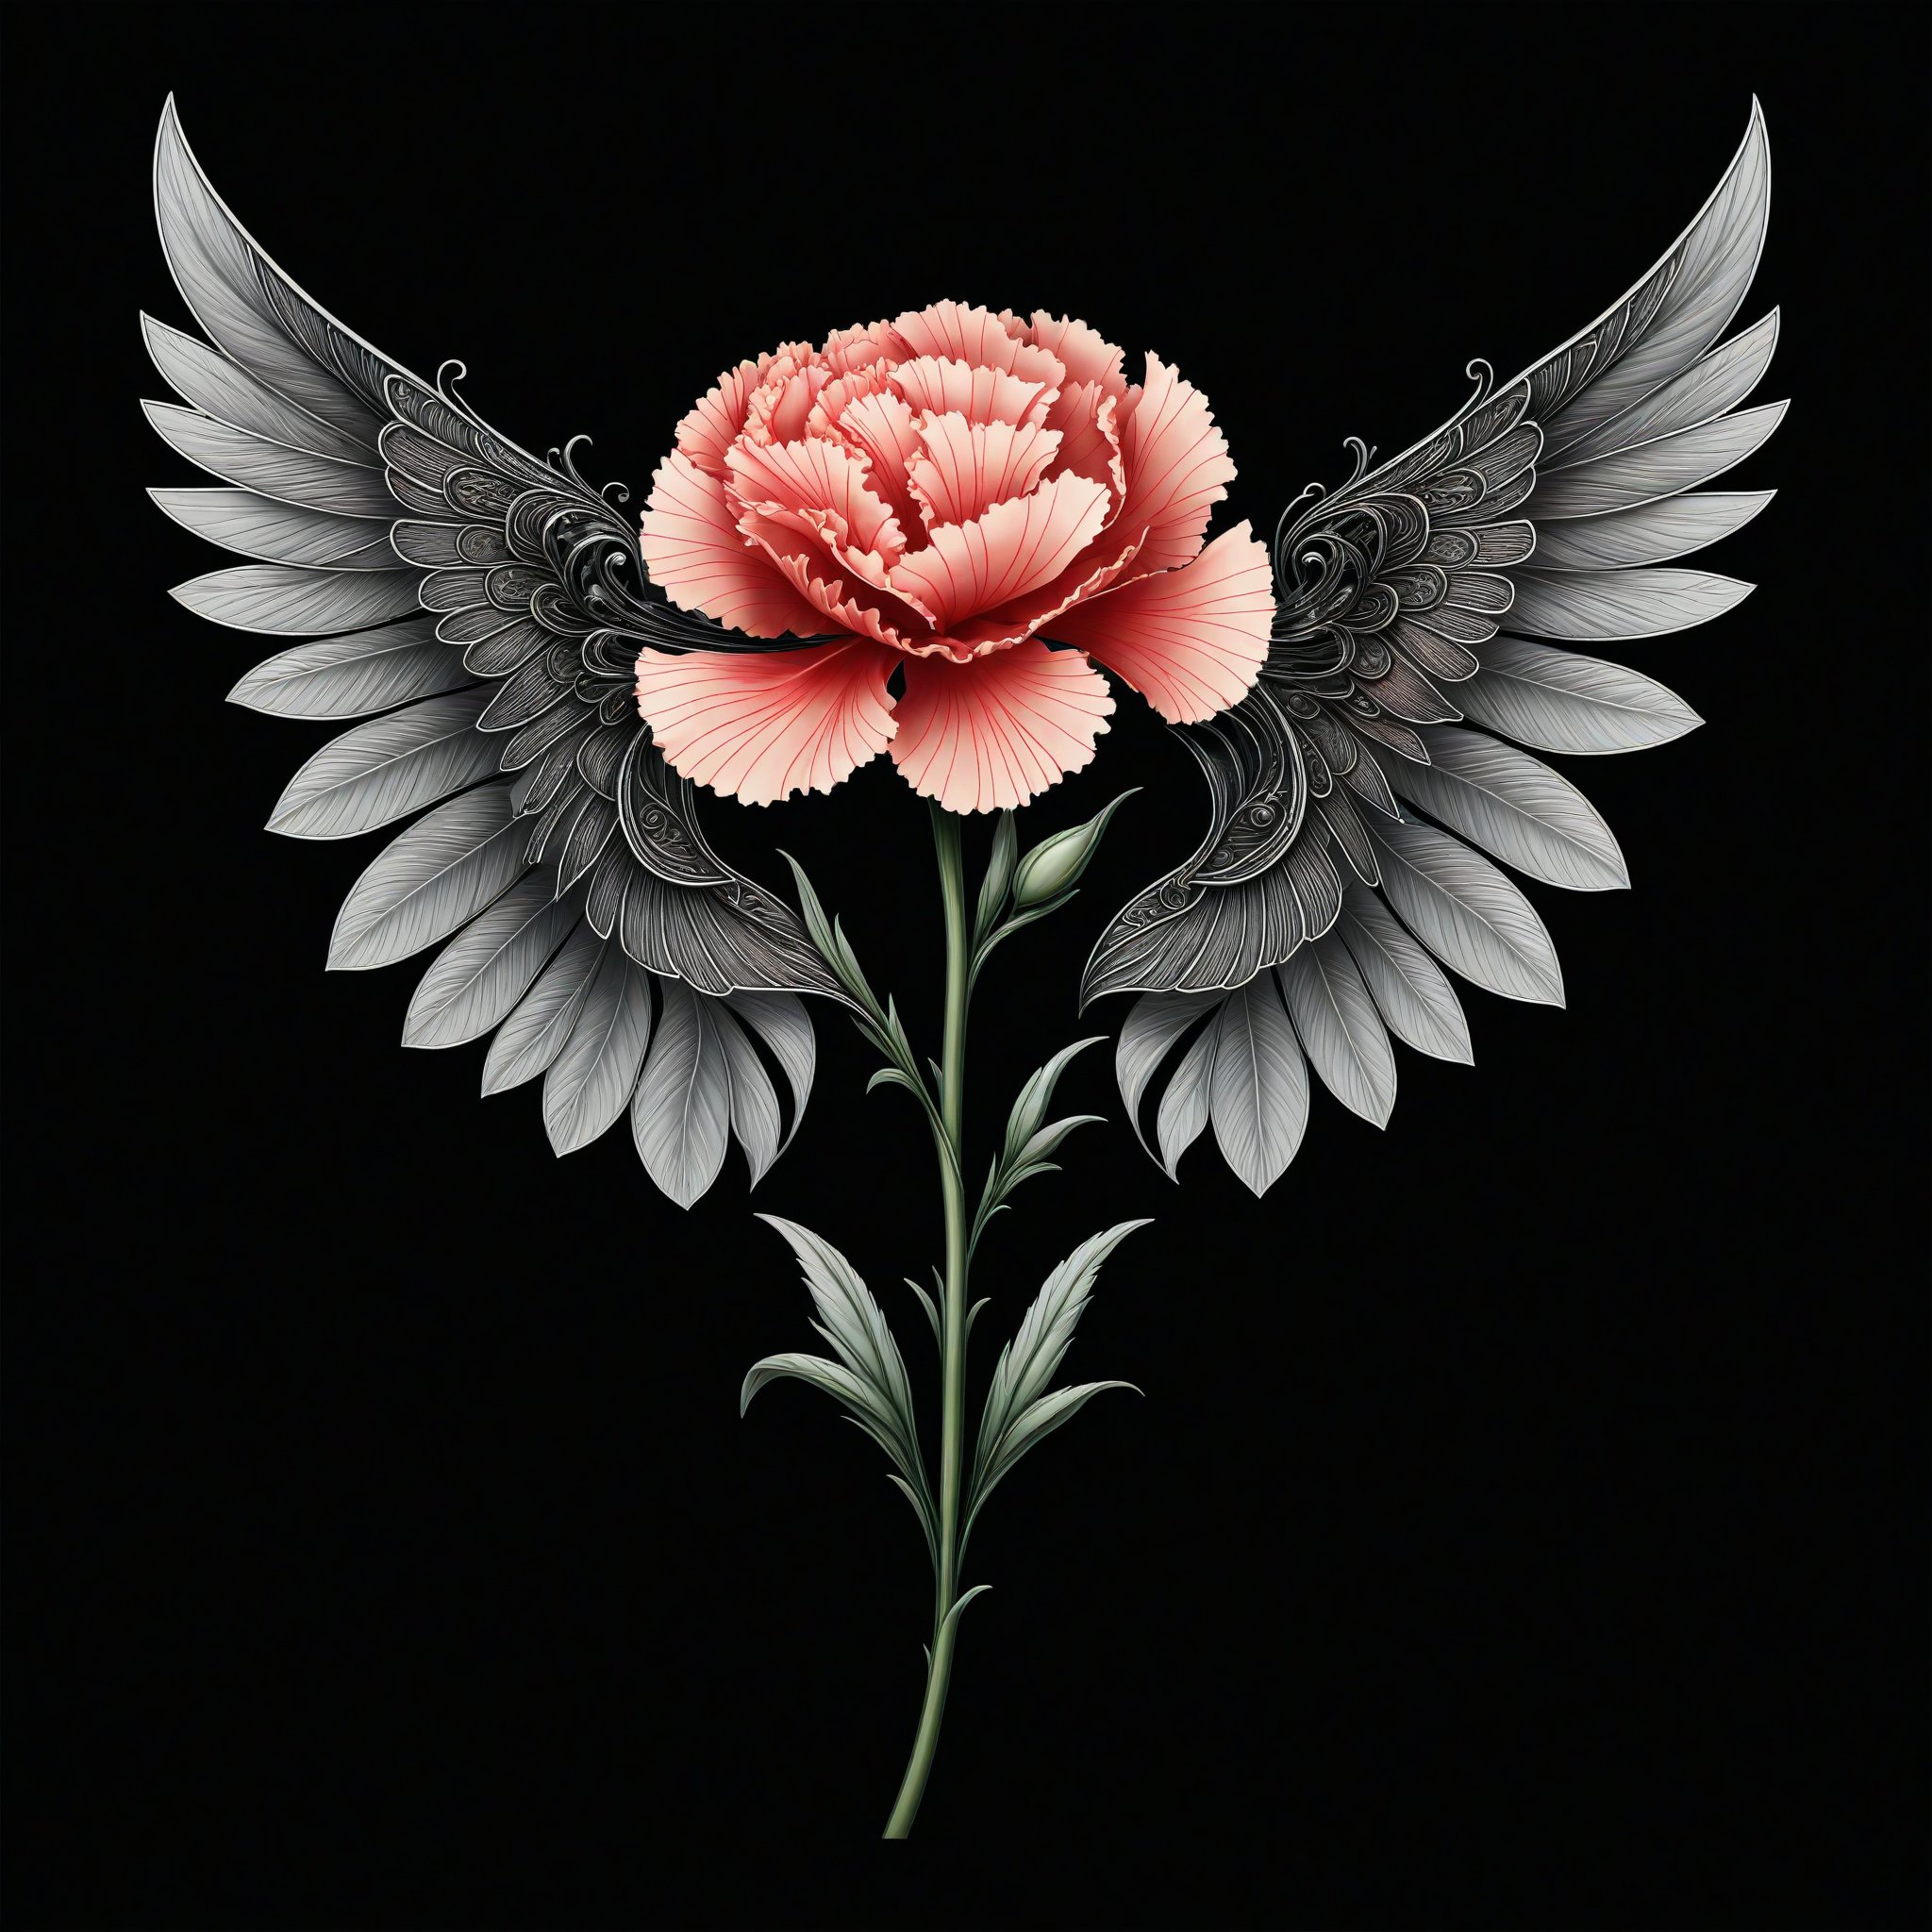 a carnation flower whit wing majestic with clasic ornament Mechanical lines Elegance T-shirt design, BLACK BACKGROUND